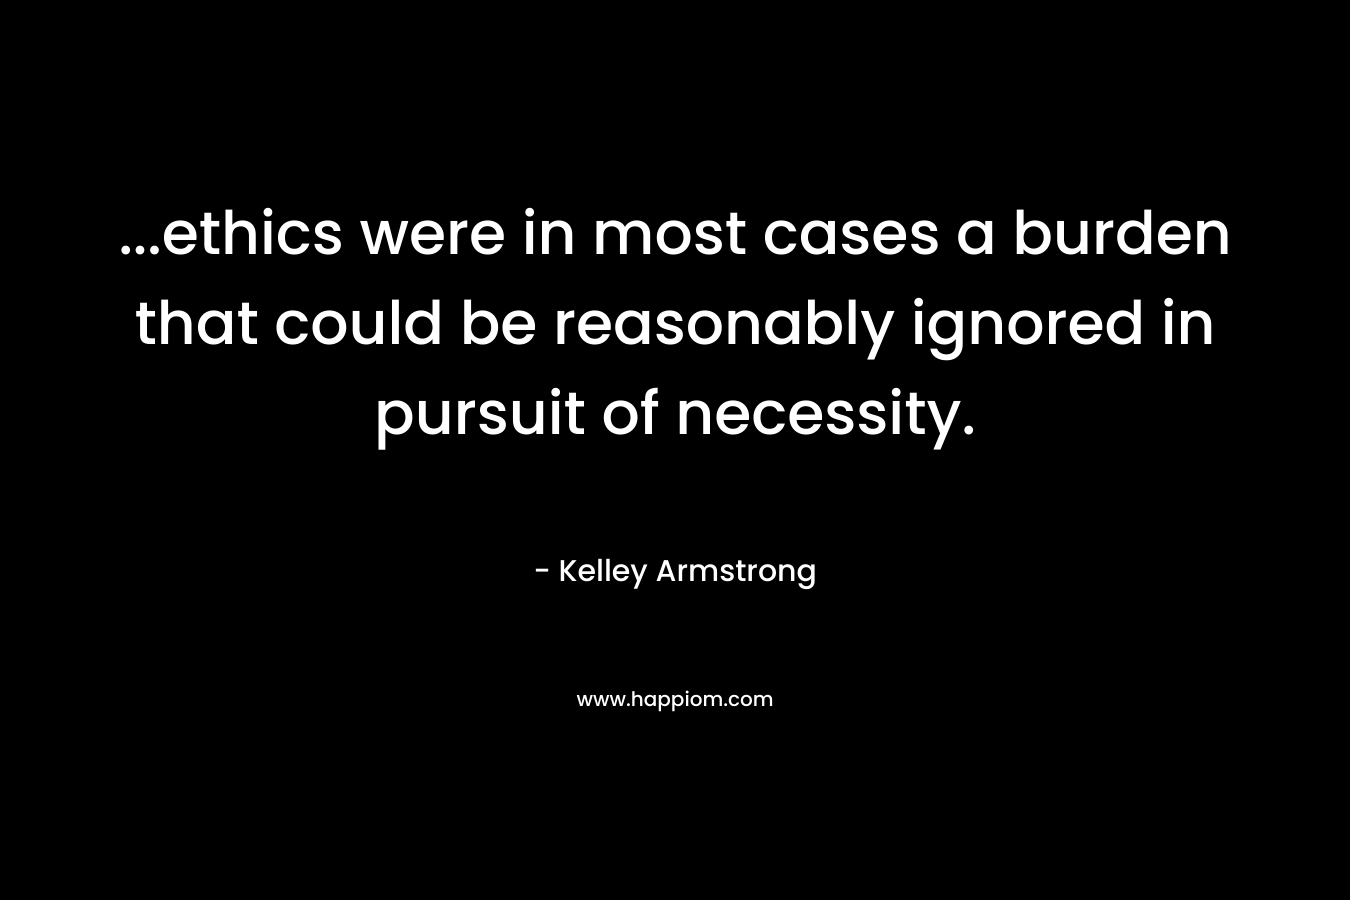 ...ethics were in most cases a burden that could be reasonably ignored in pursuit of necessity.